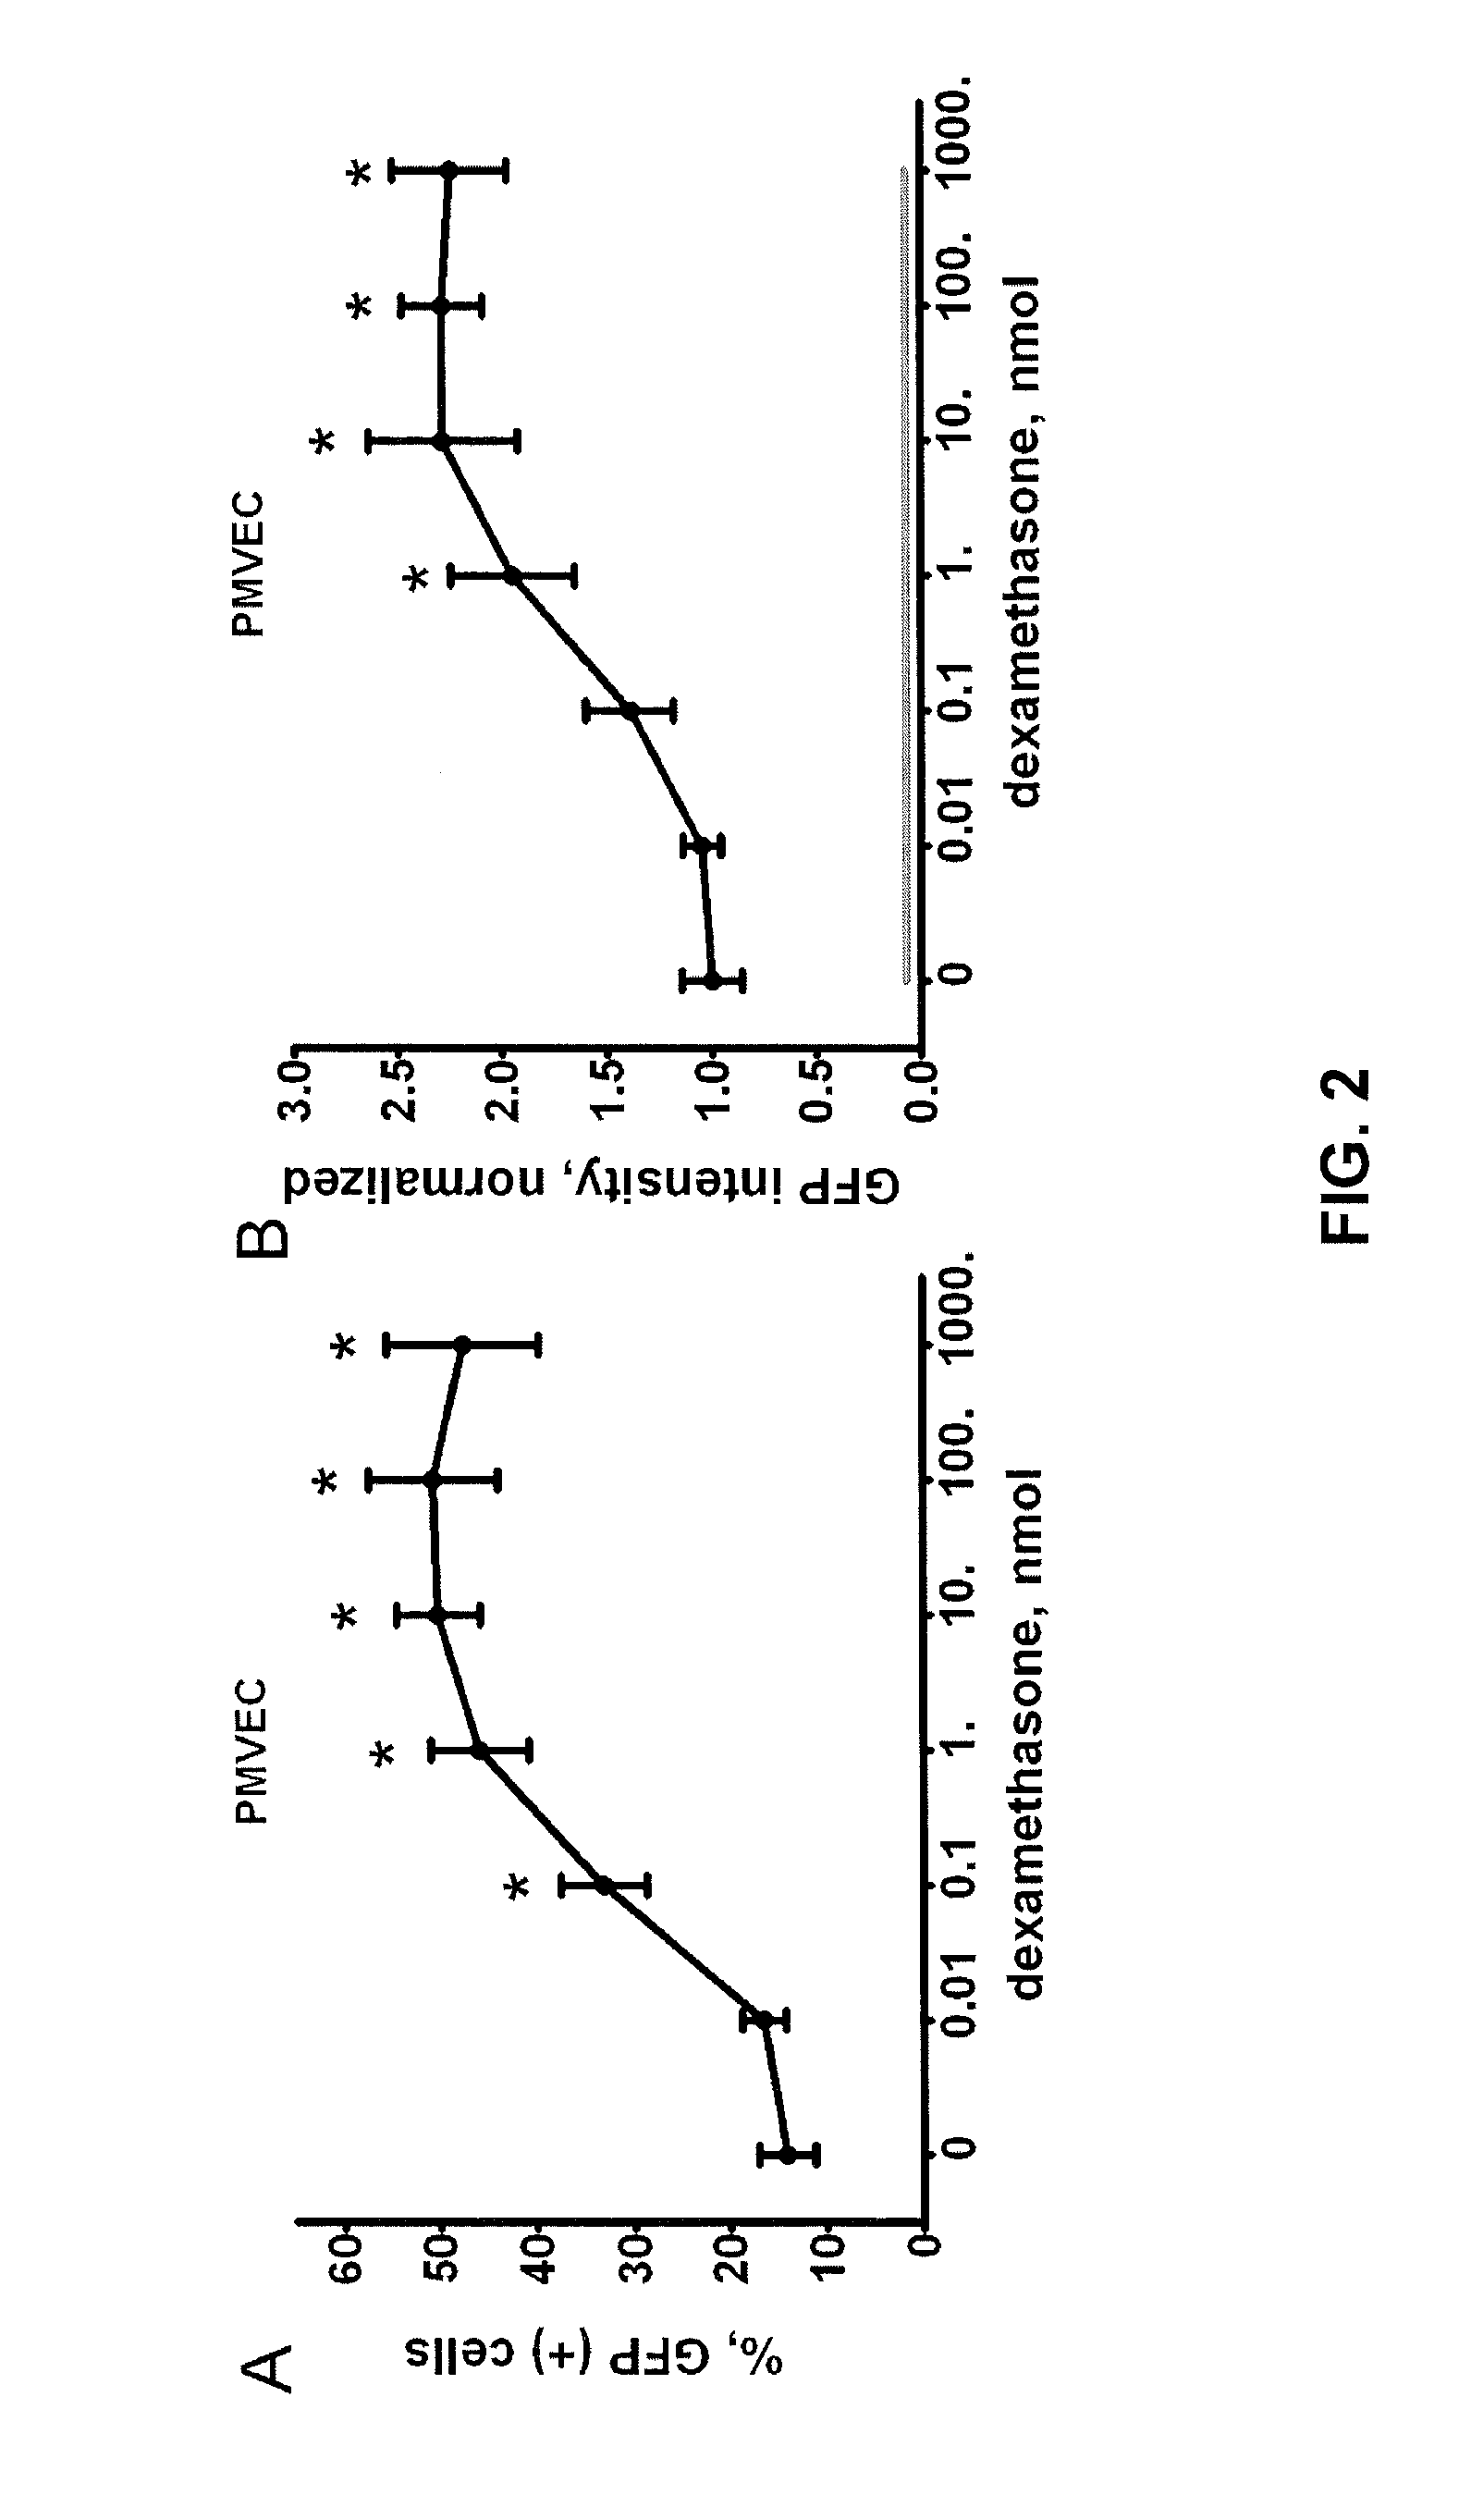 Method for increasing retroviral infectivity